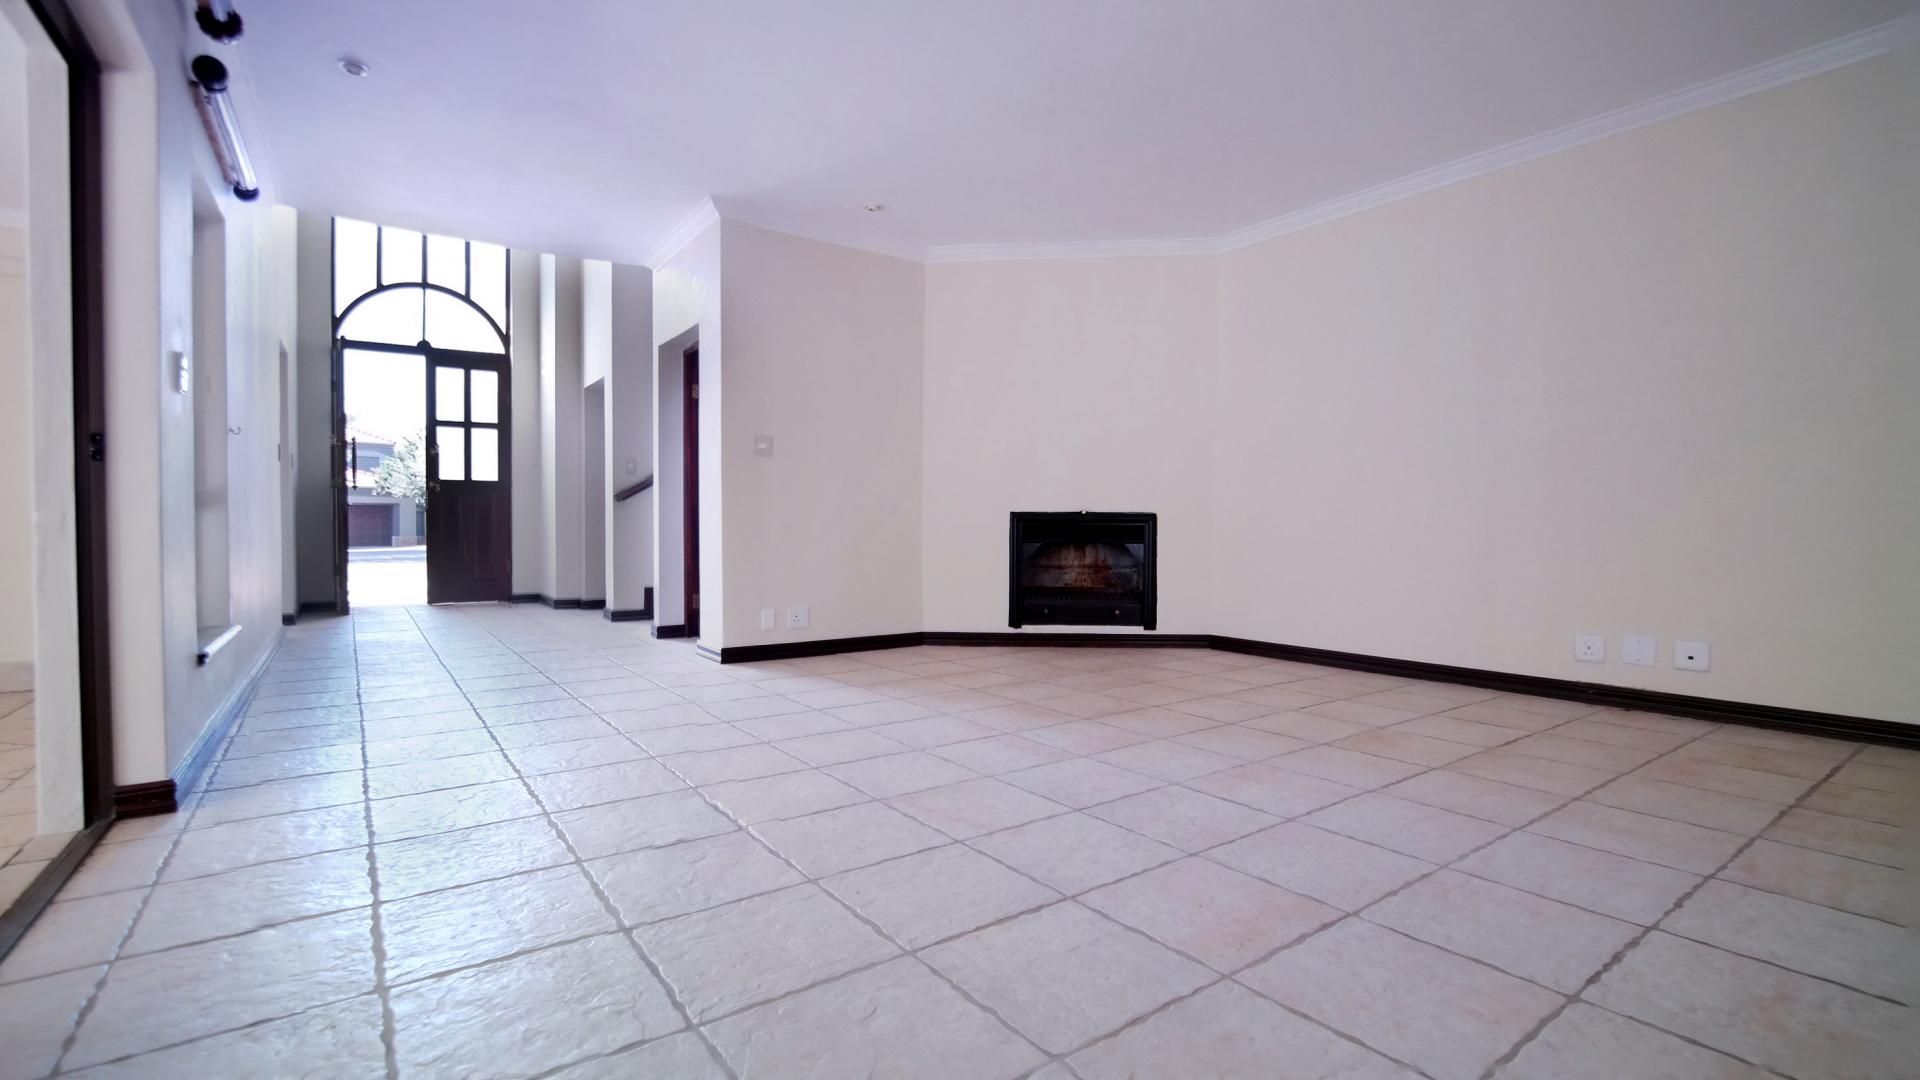 TV Room - 31 square meters of property in Woodhill Golf Estate